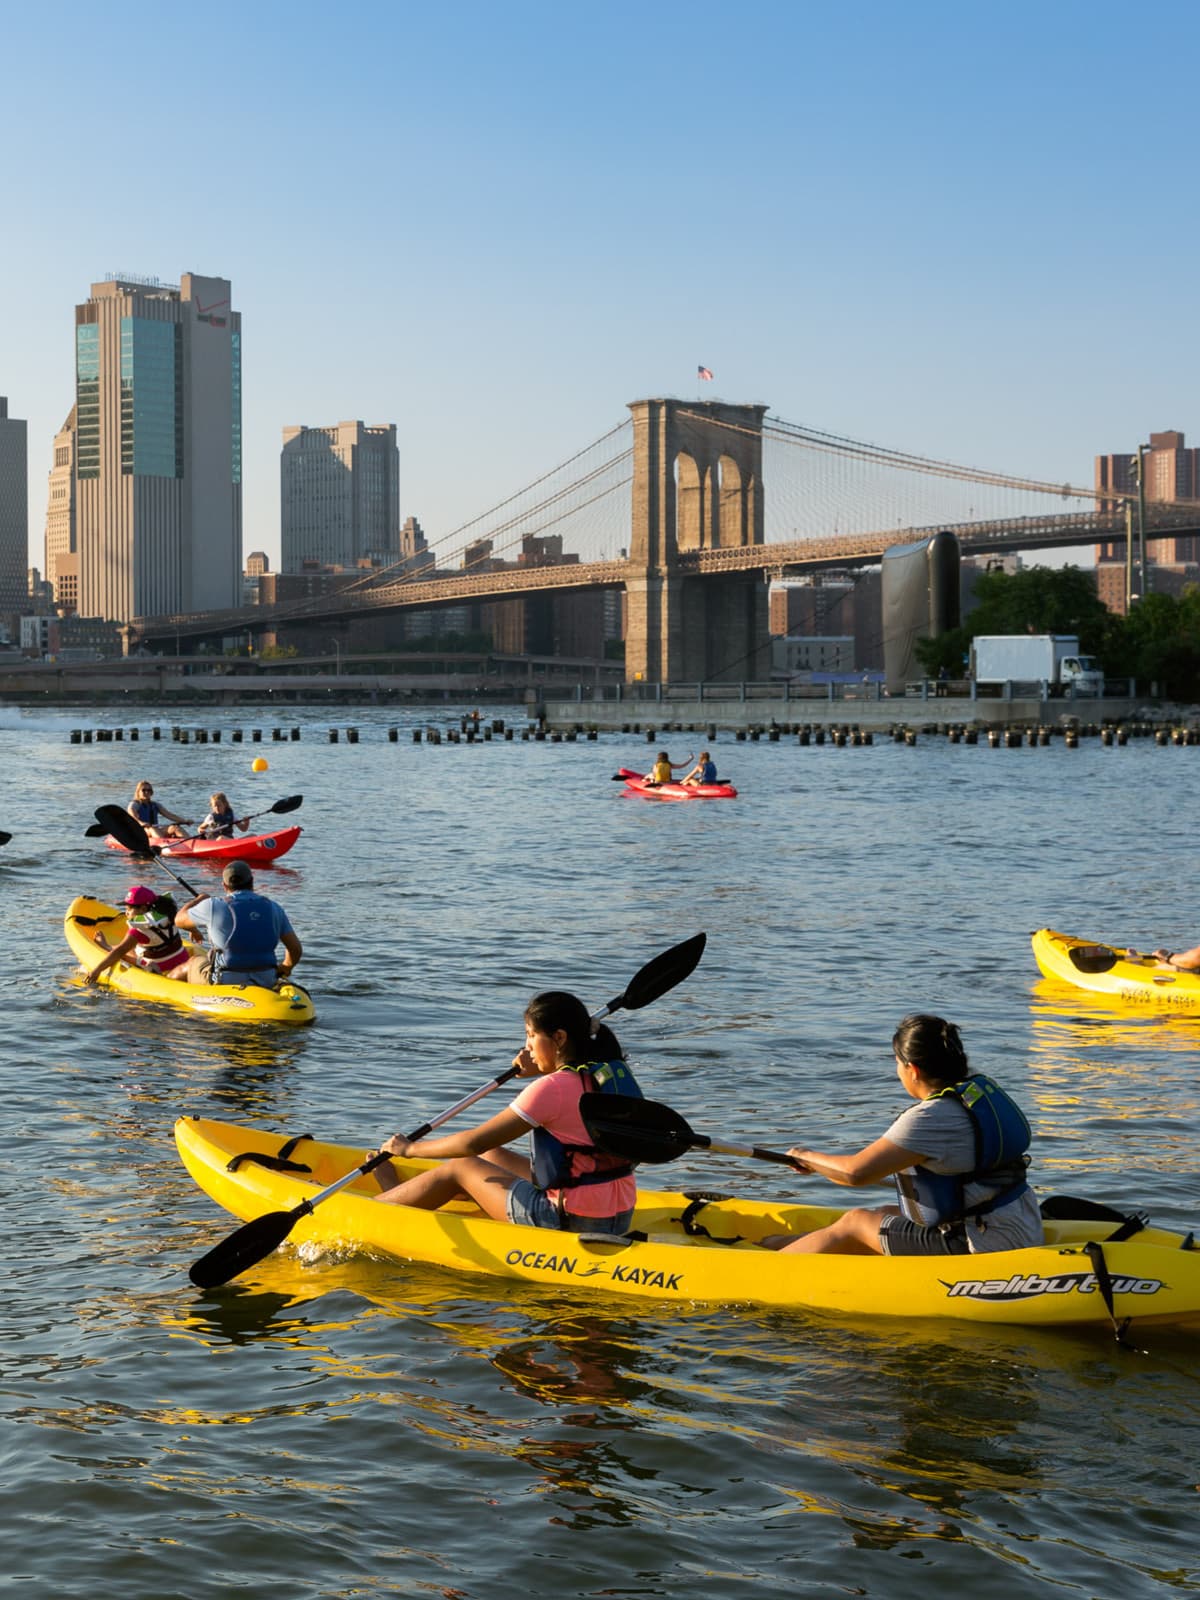 Groups kayaking at sunset with Pier 1 Salt Marsh and the Brooklyn Bridge in the background.